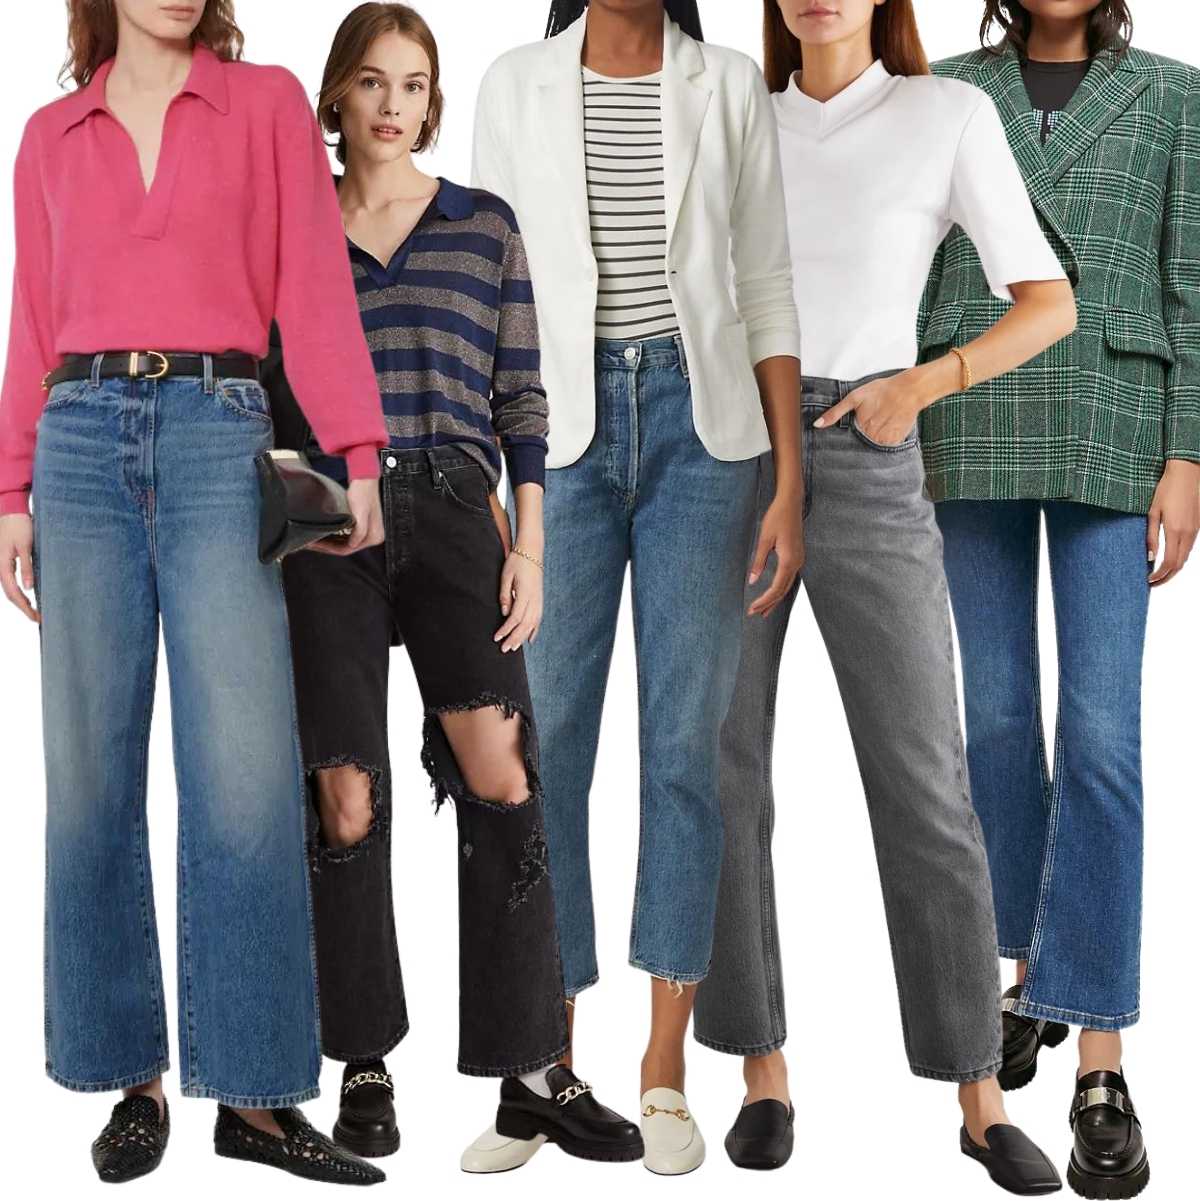 Collage of 5 women wearing loafers with jeans.